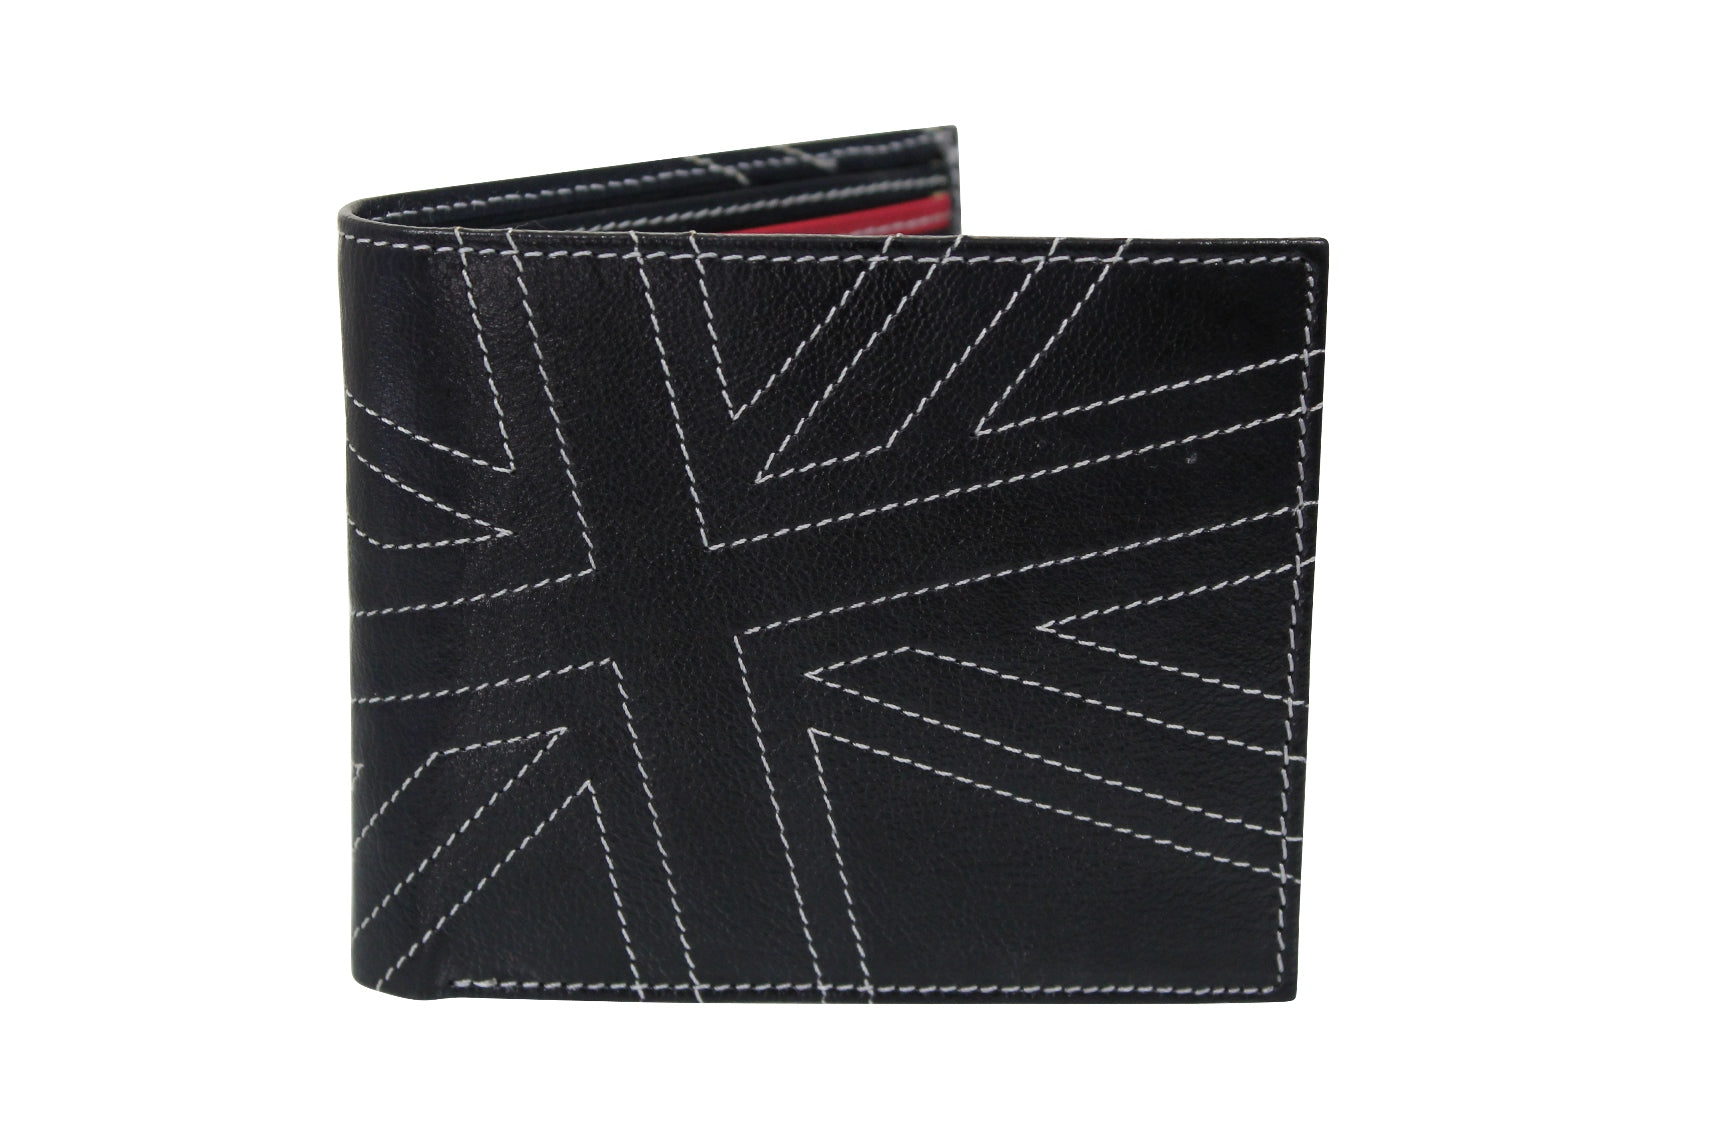 Xact Mens Quality Leather Union Jack Mod Retro Wallet with Coin Pocket - Gift Boxed